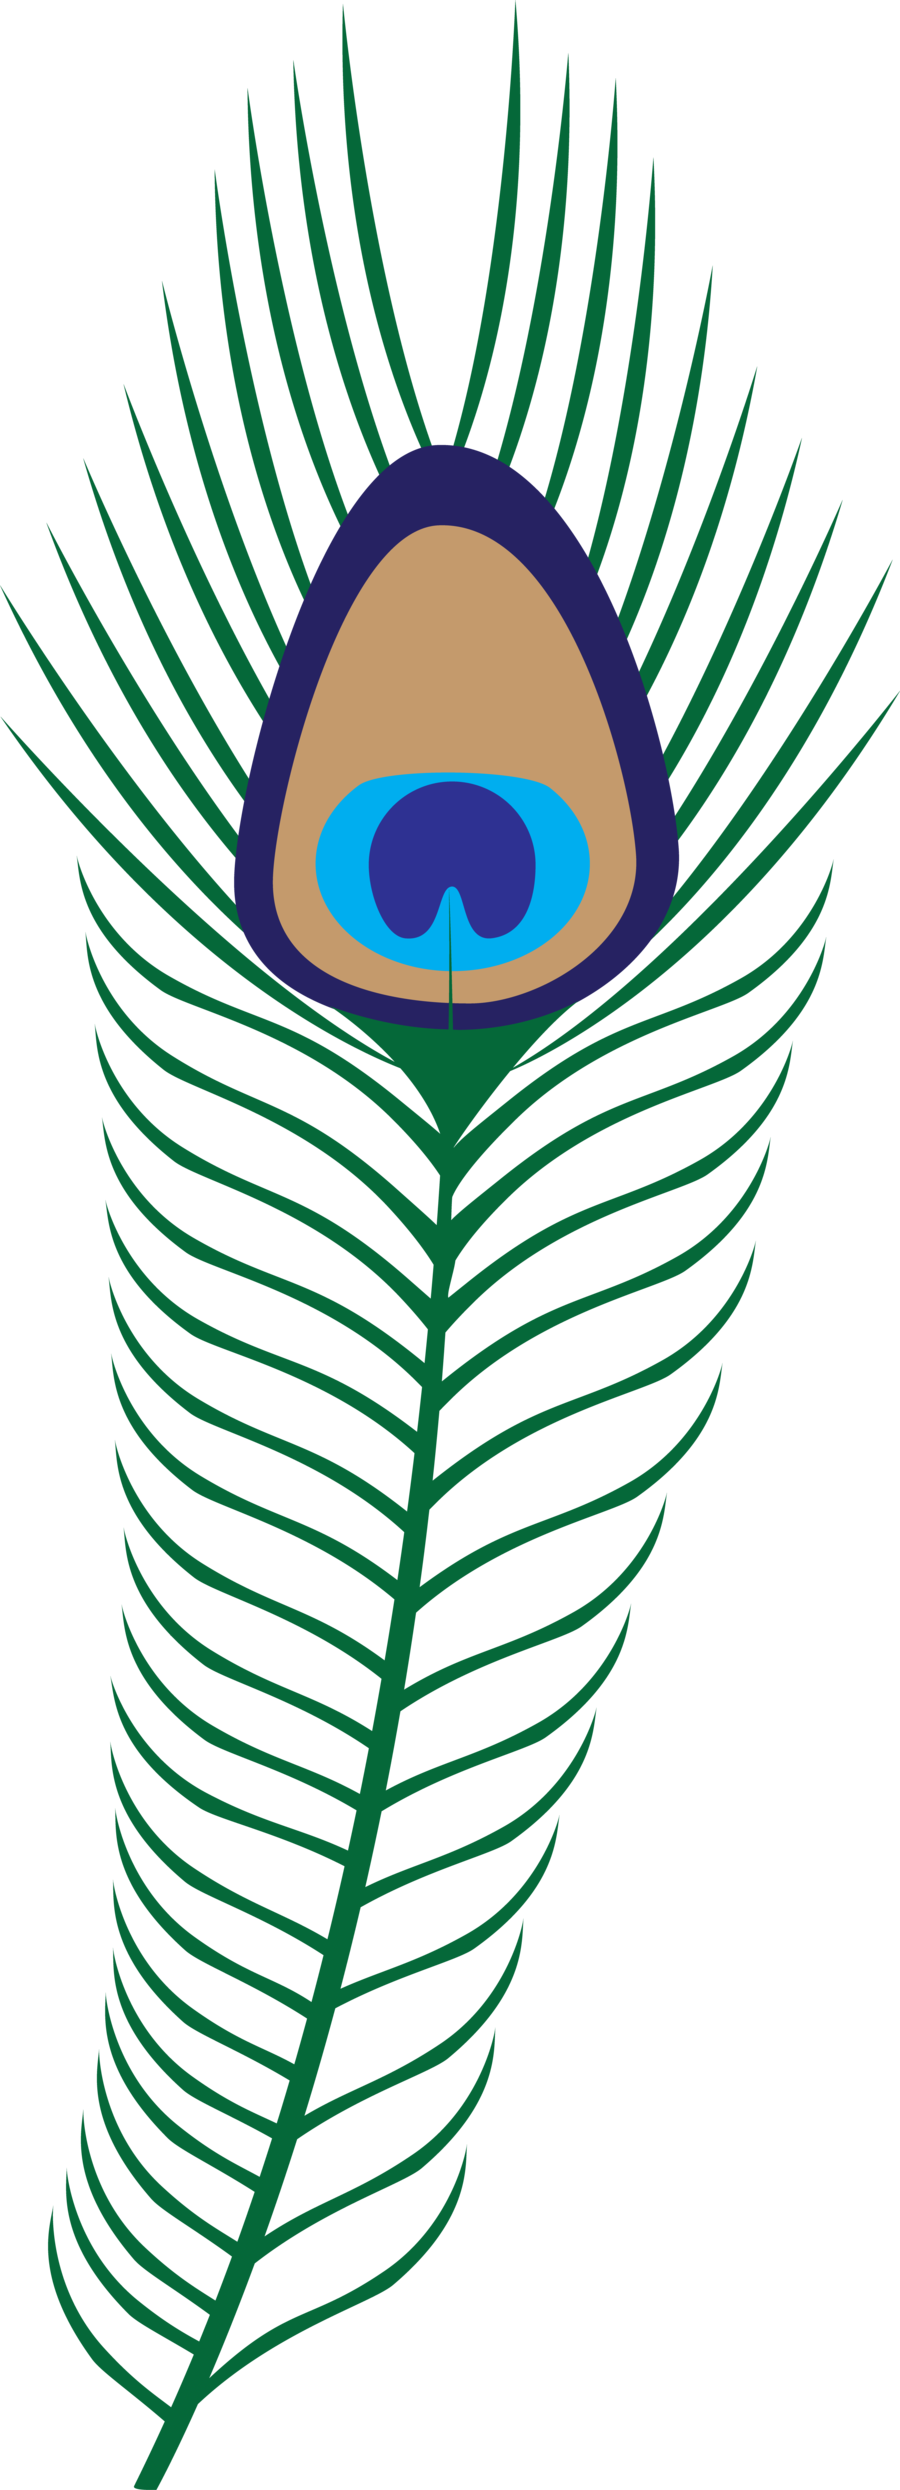 Peacock feather clip art free download